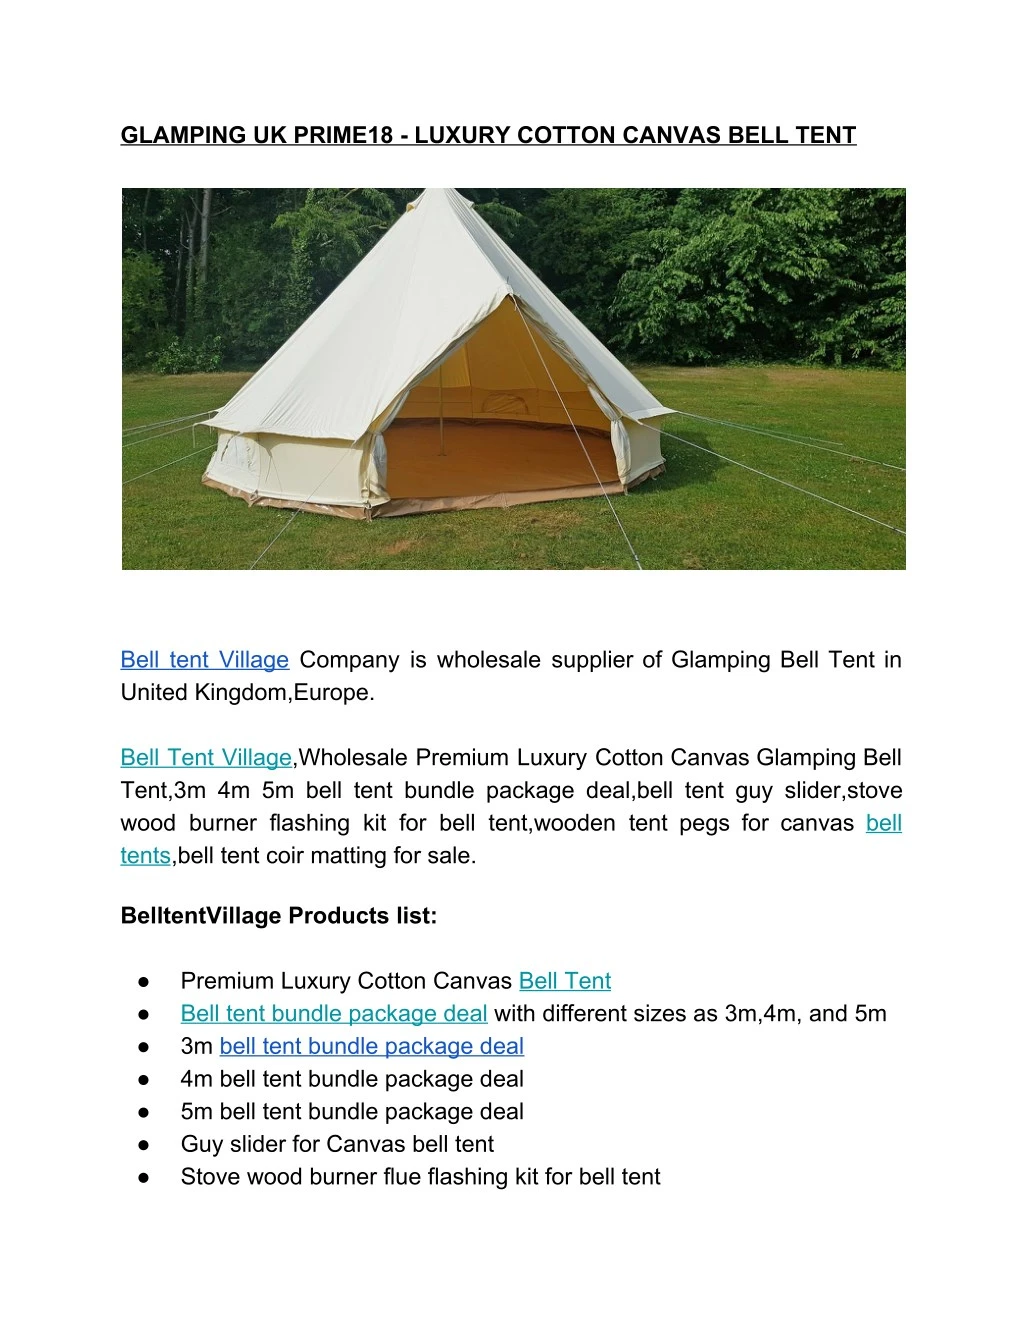 glamping uk prime18 luxury cotton canvas bell tent